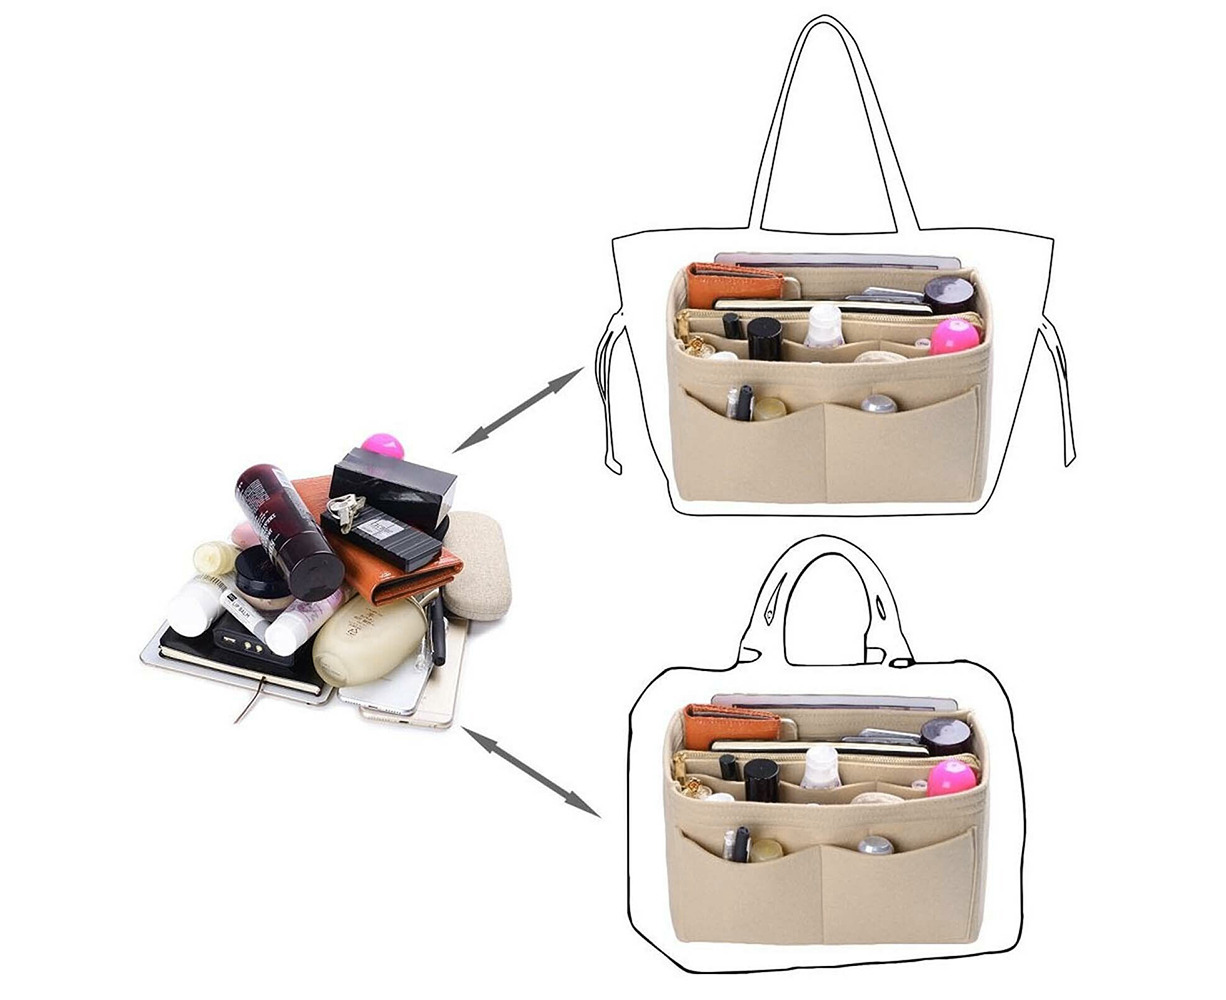 Purse Organization Tips to Help You Feel Confident and In Control